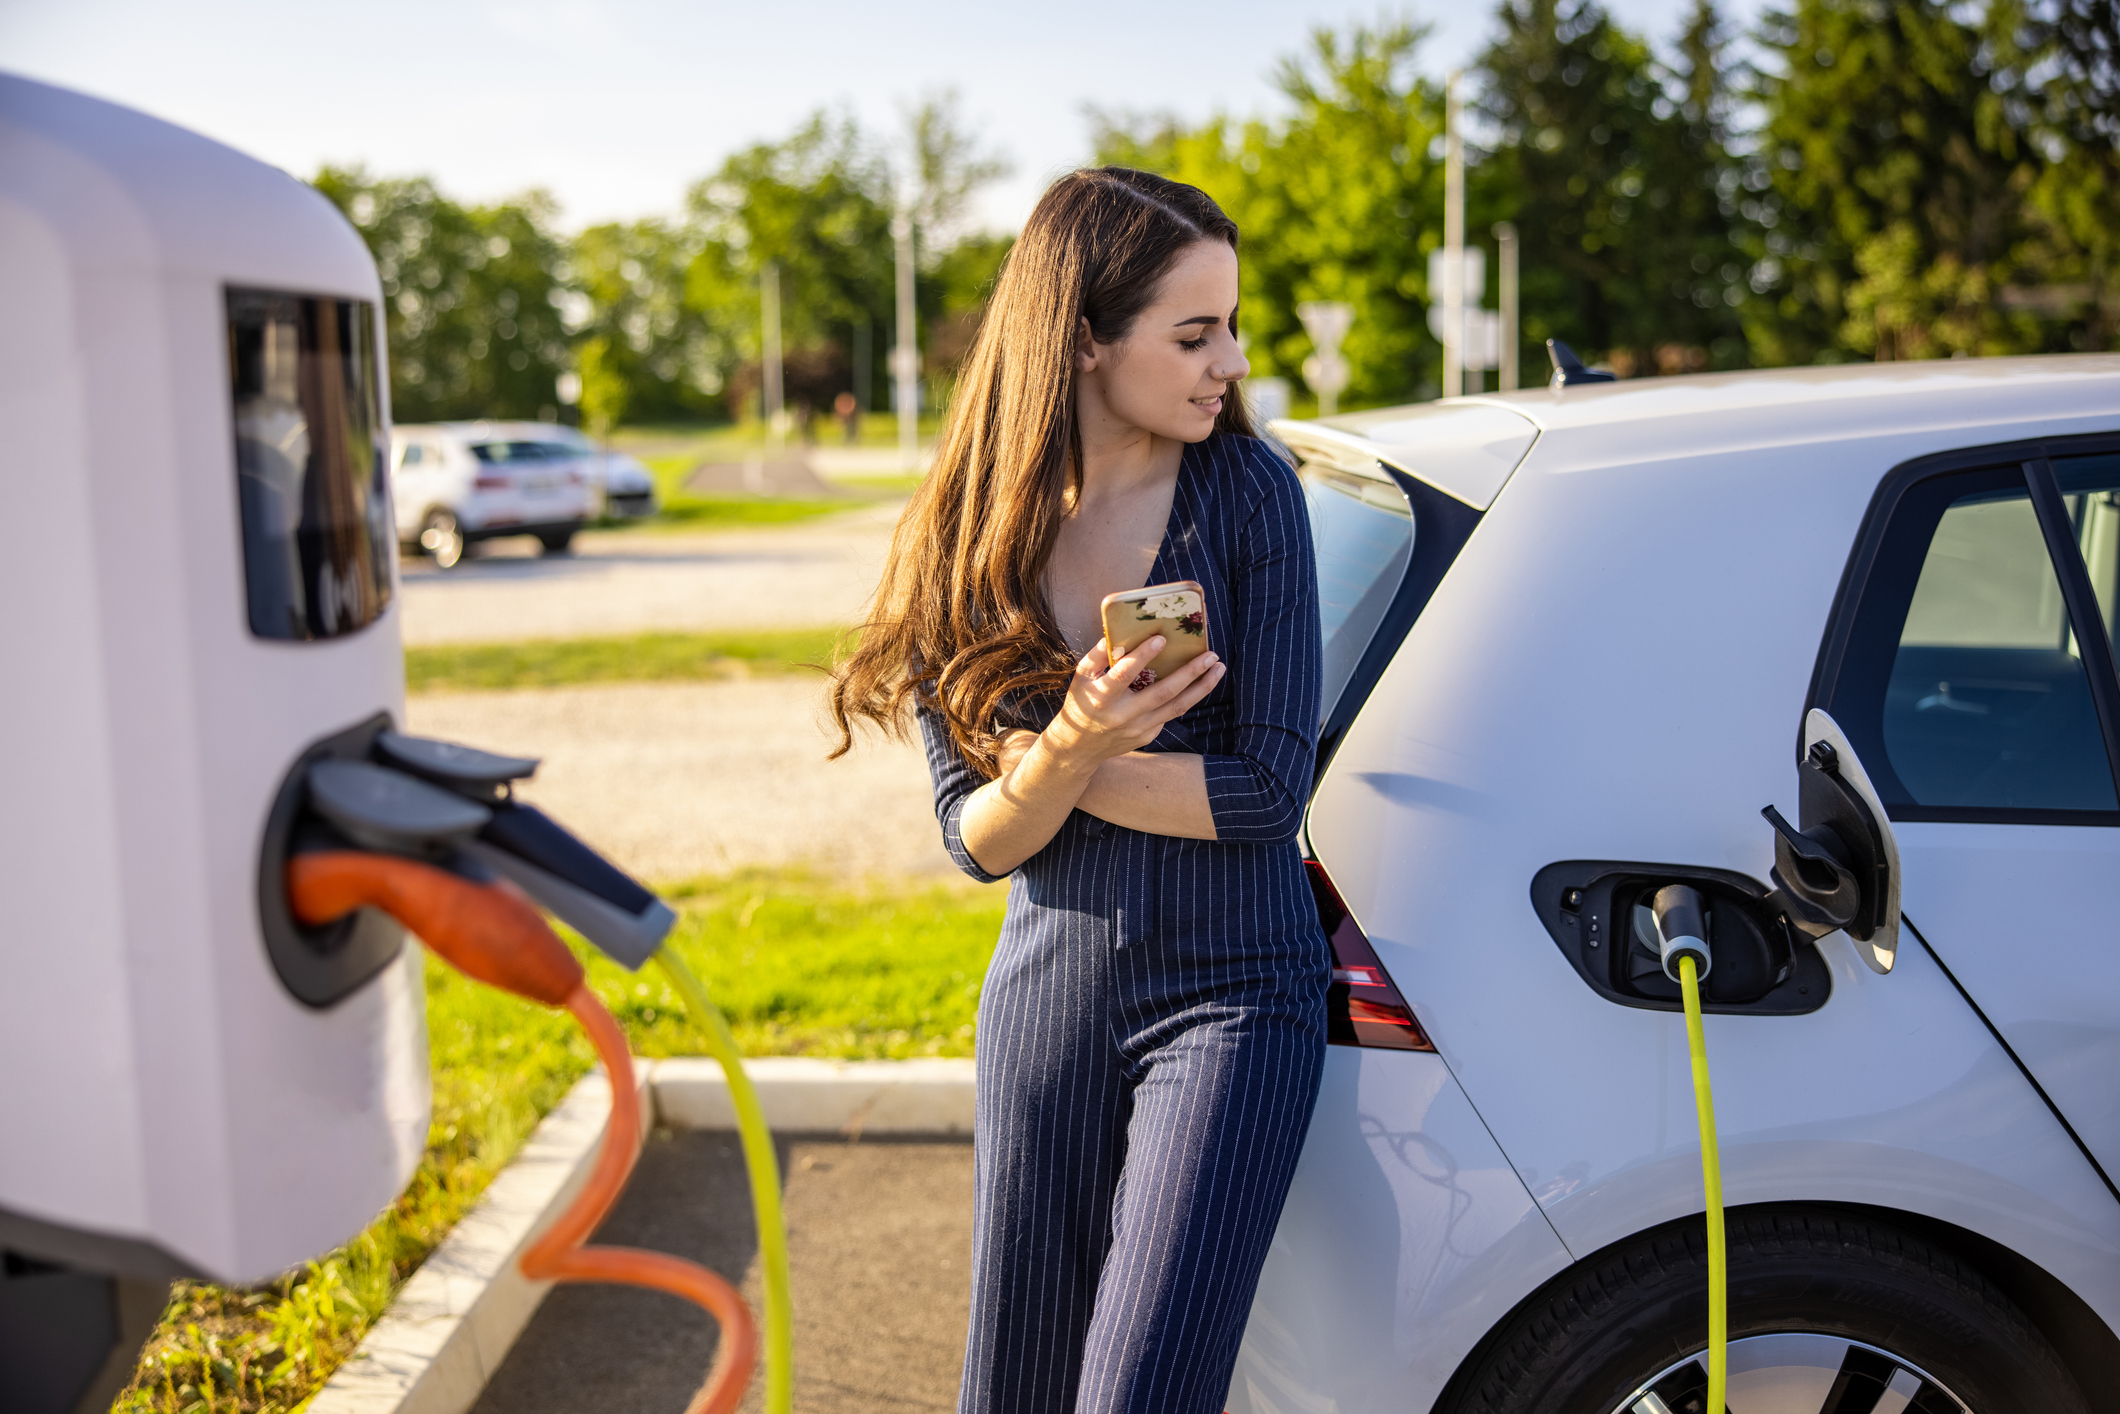 woman using a phone while an electric car charges